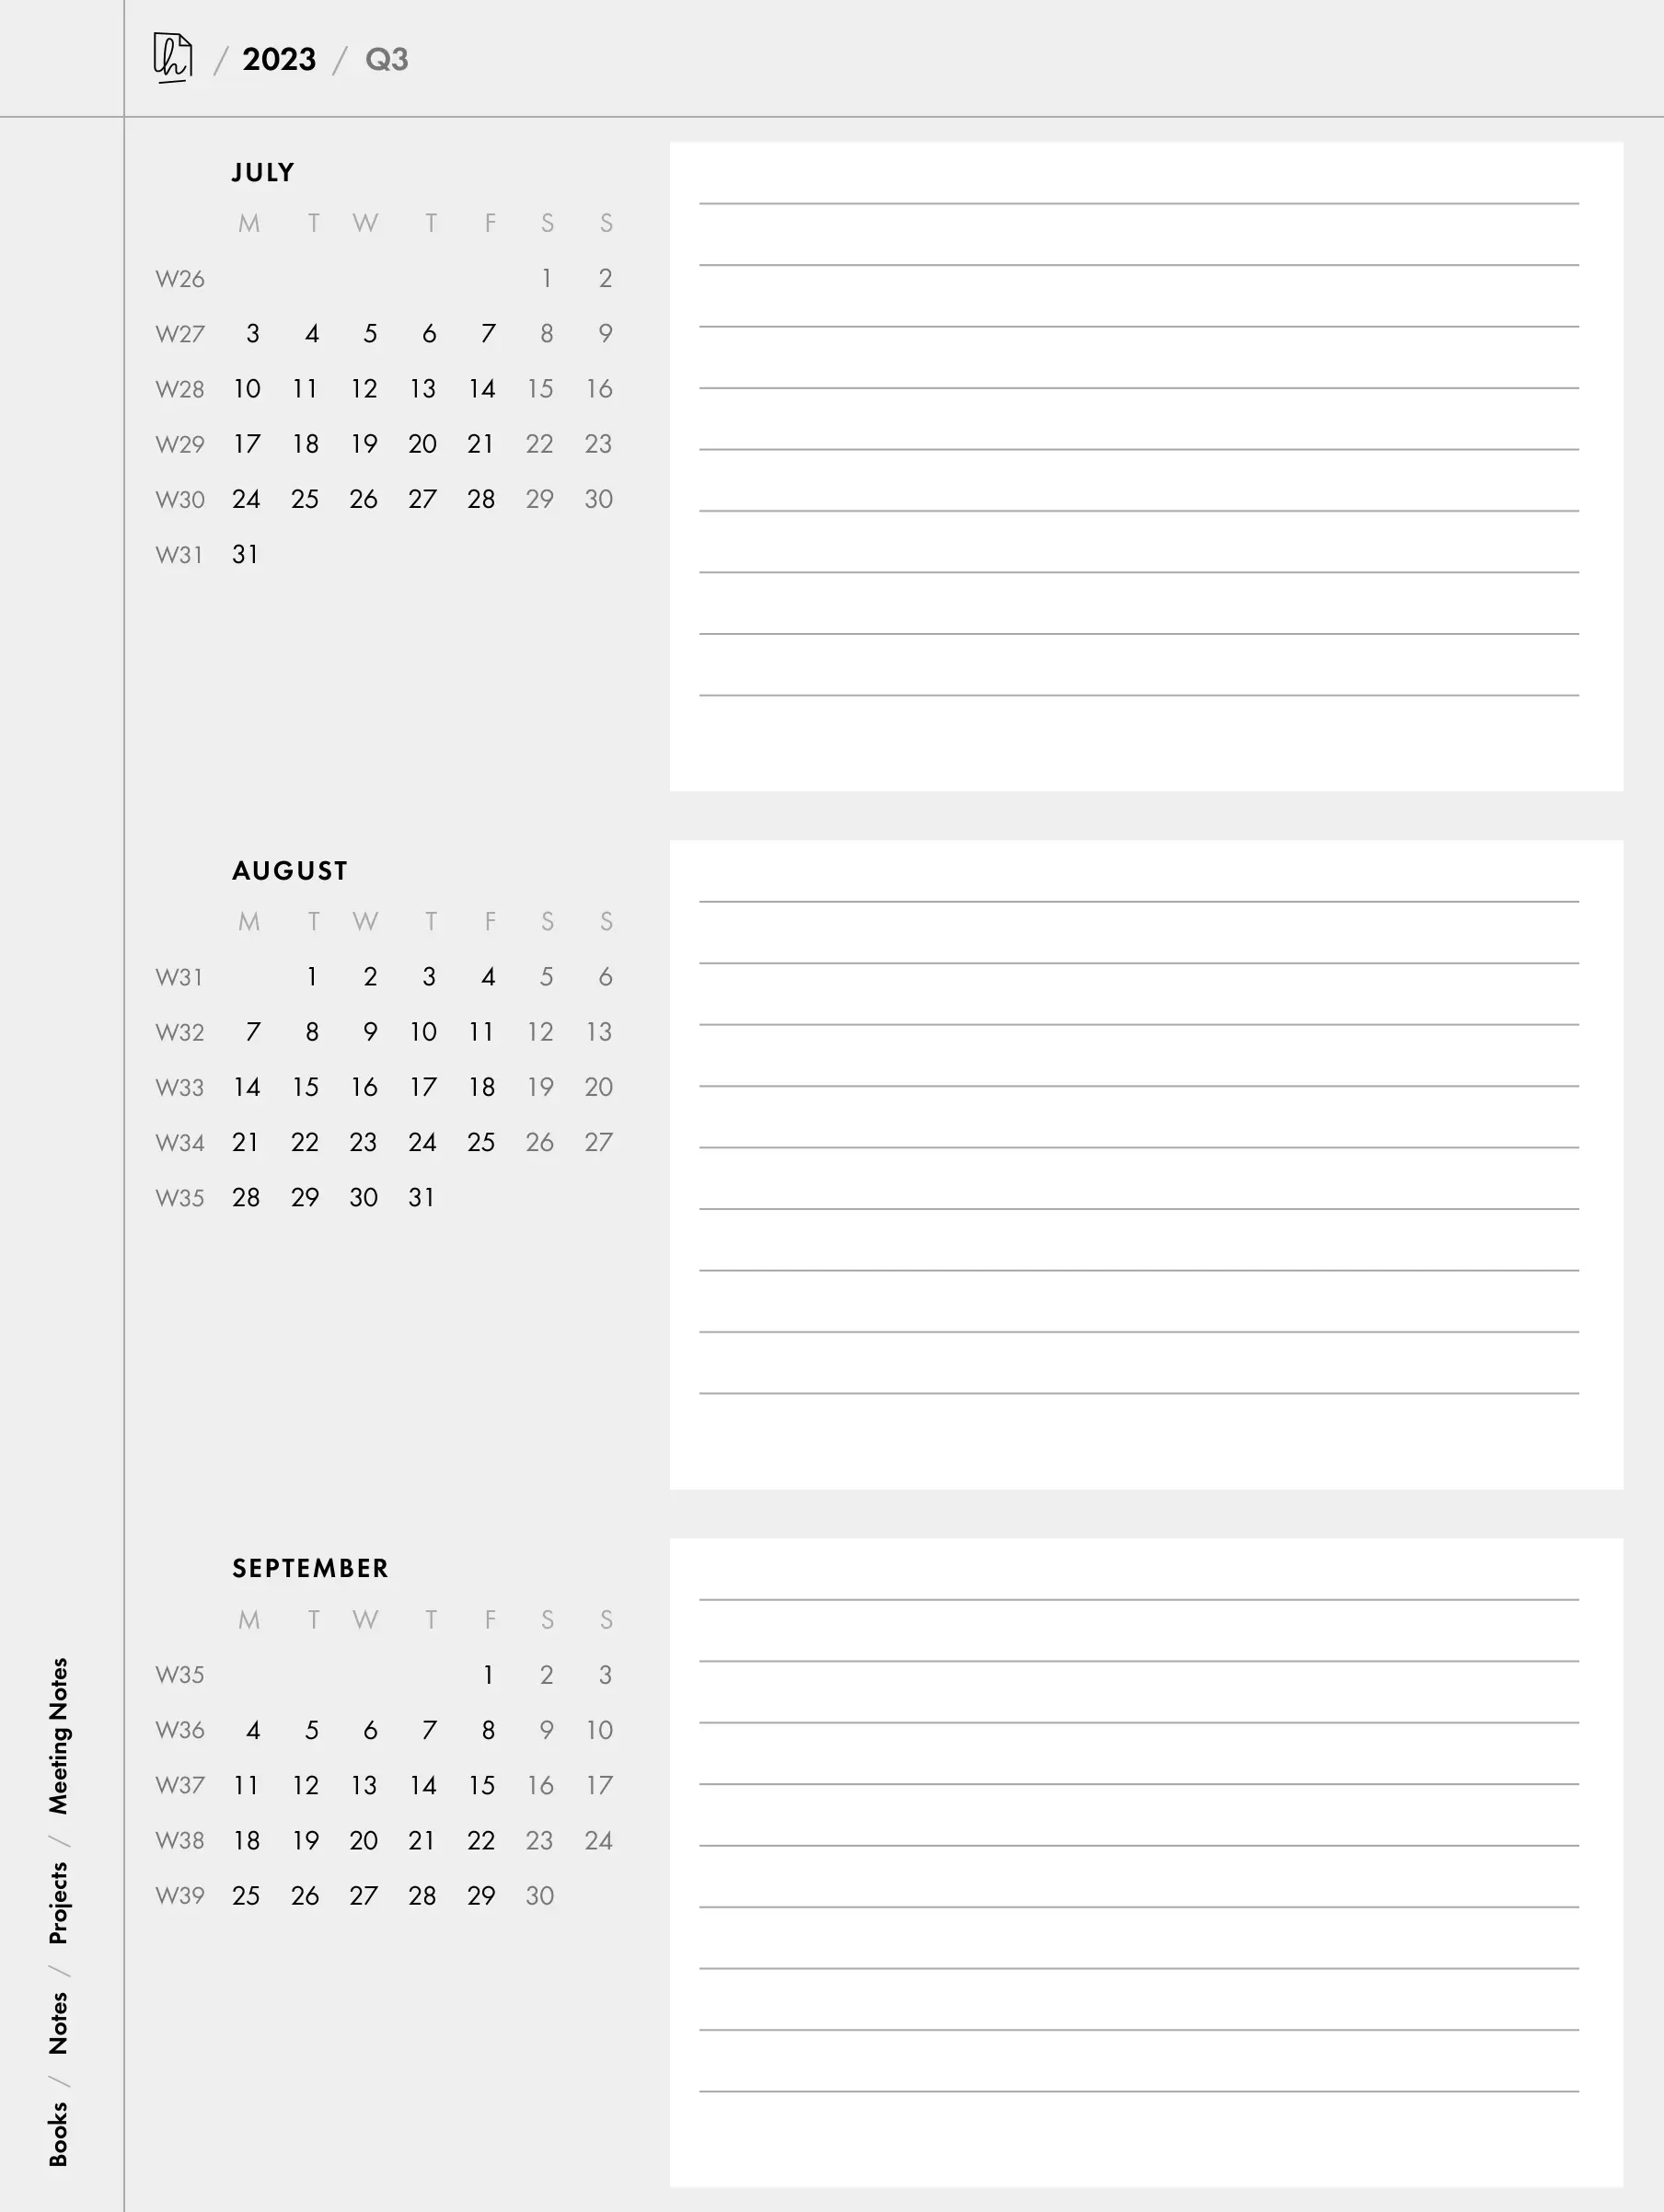 Quarterly planning page